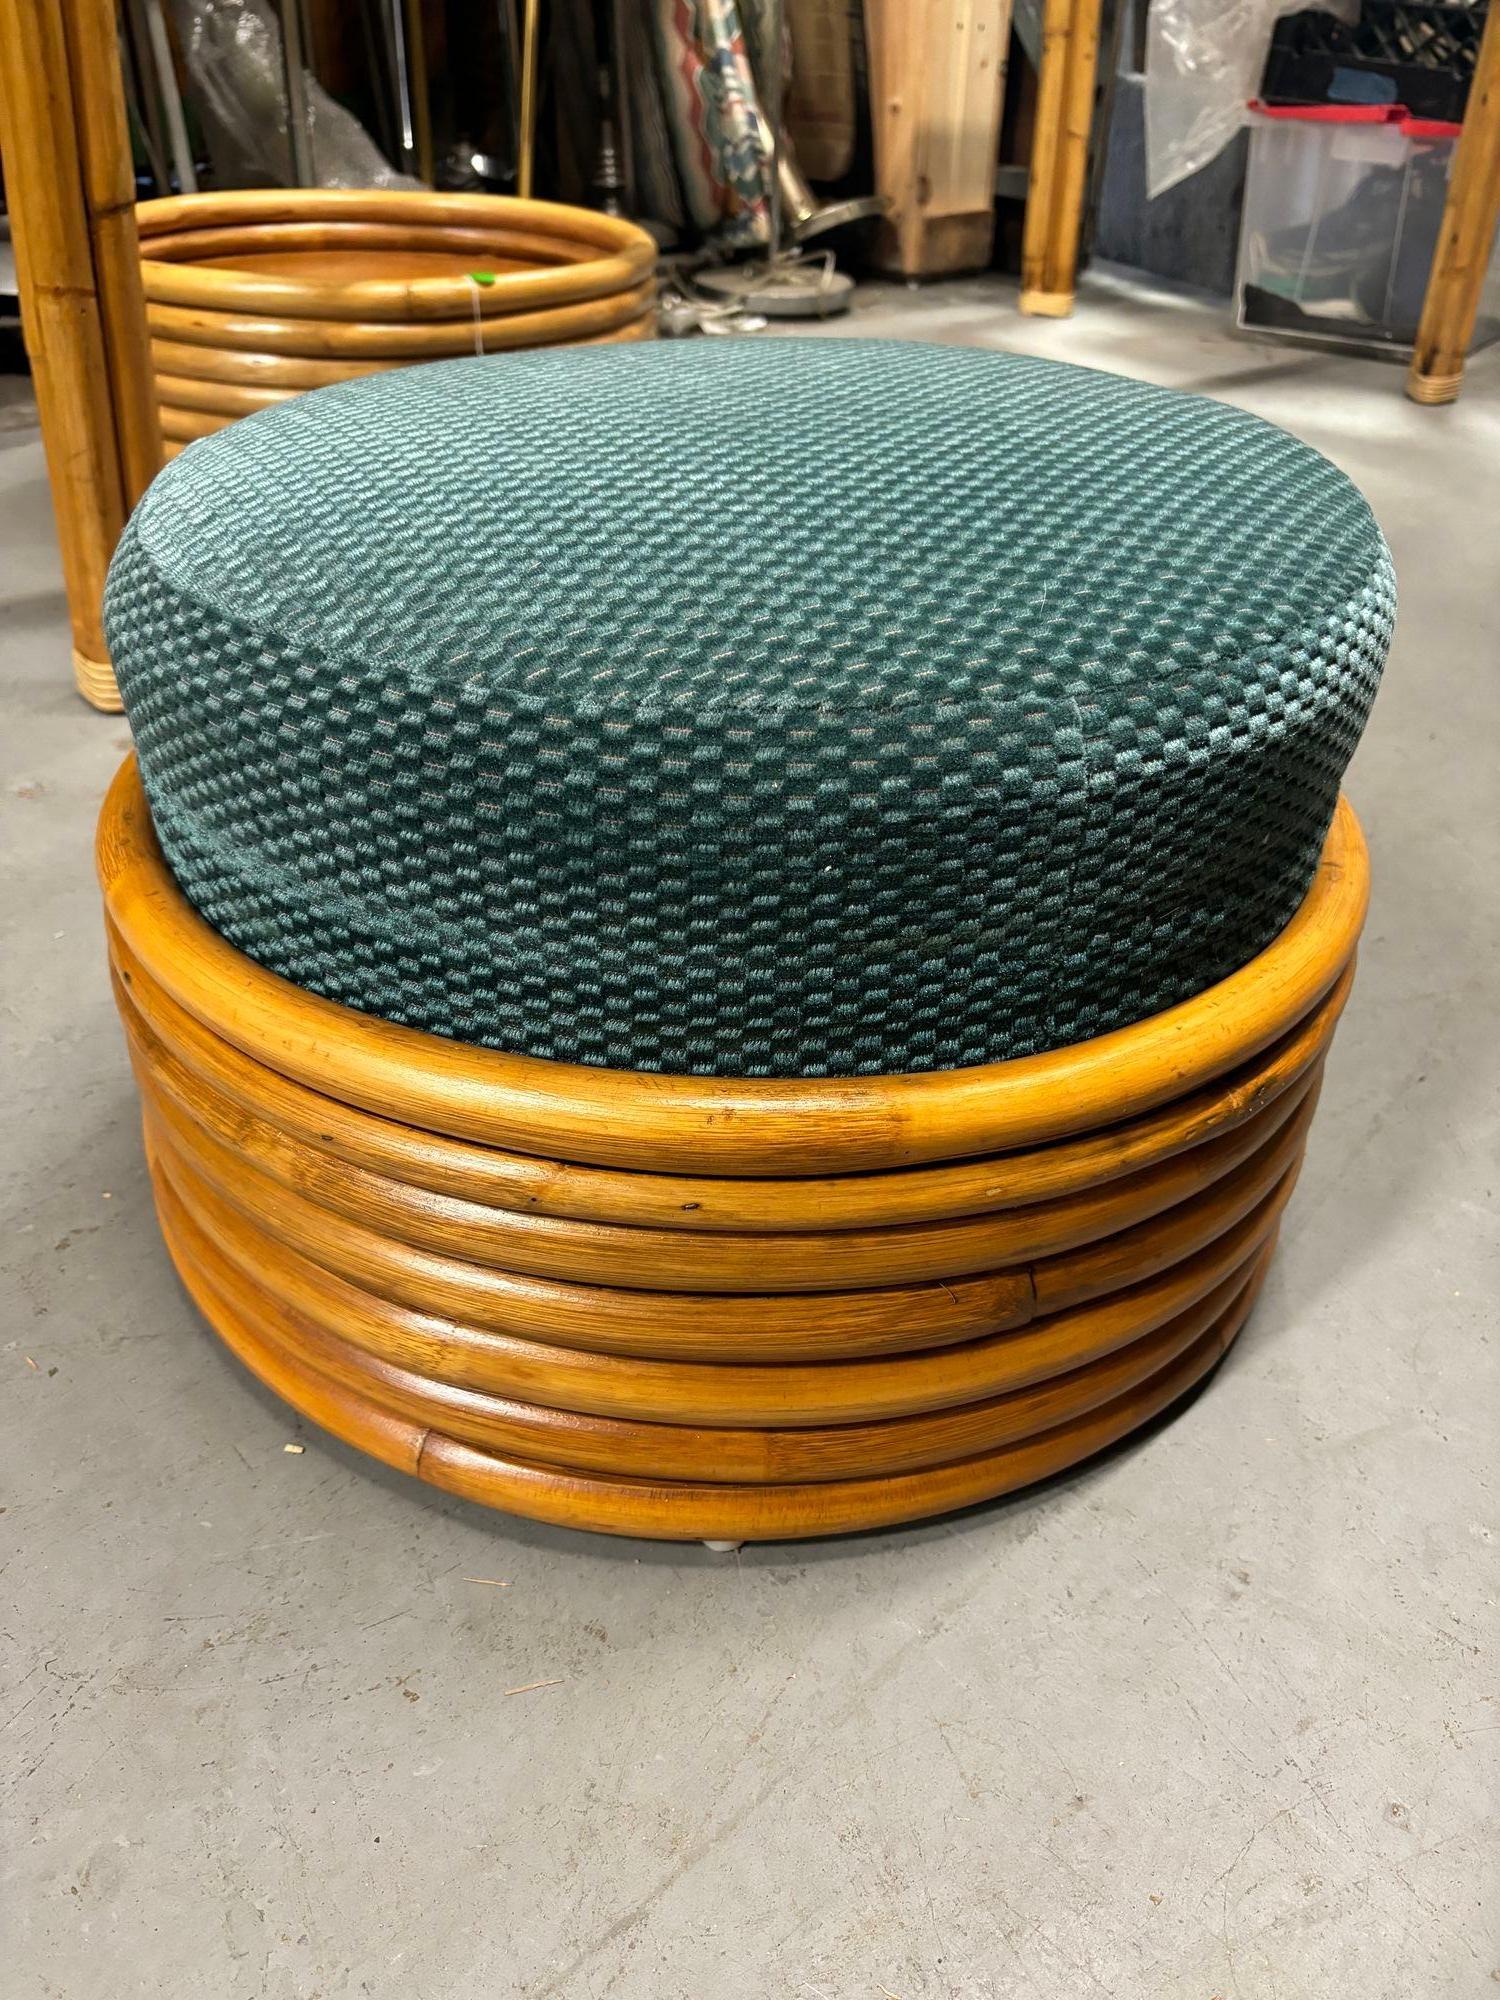 The Restored Rattan Round Ottoman 7-Strand is a stylish and sustainable furniture piece. Crafted from high-quality rattan, its seven-strand design showcases meticulous restoration, blending vintage charm with modern elegance. This round ottoman adds